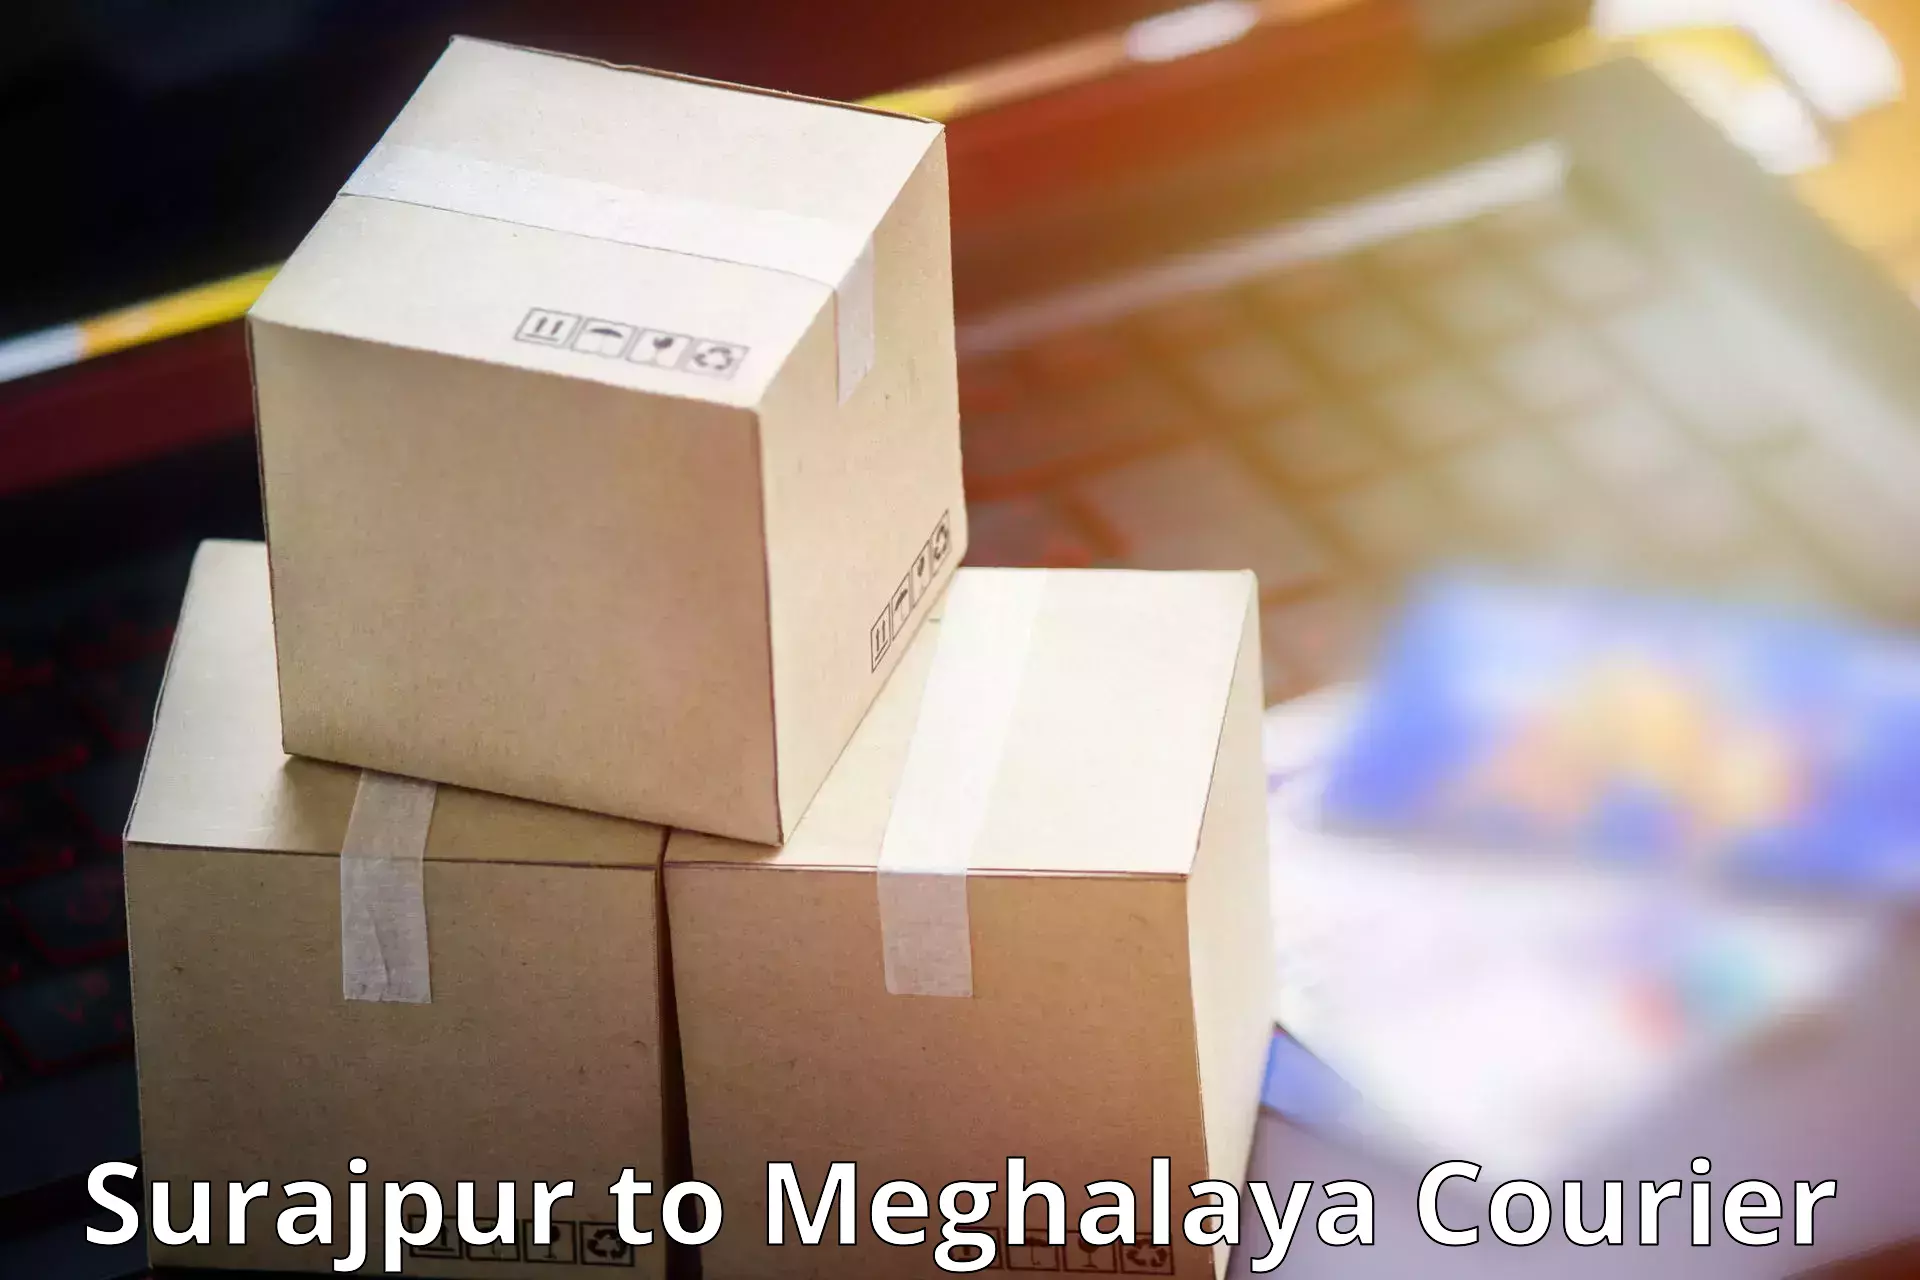 Global courier networks Surajpur to Meghalaya